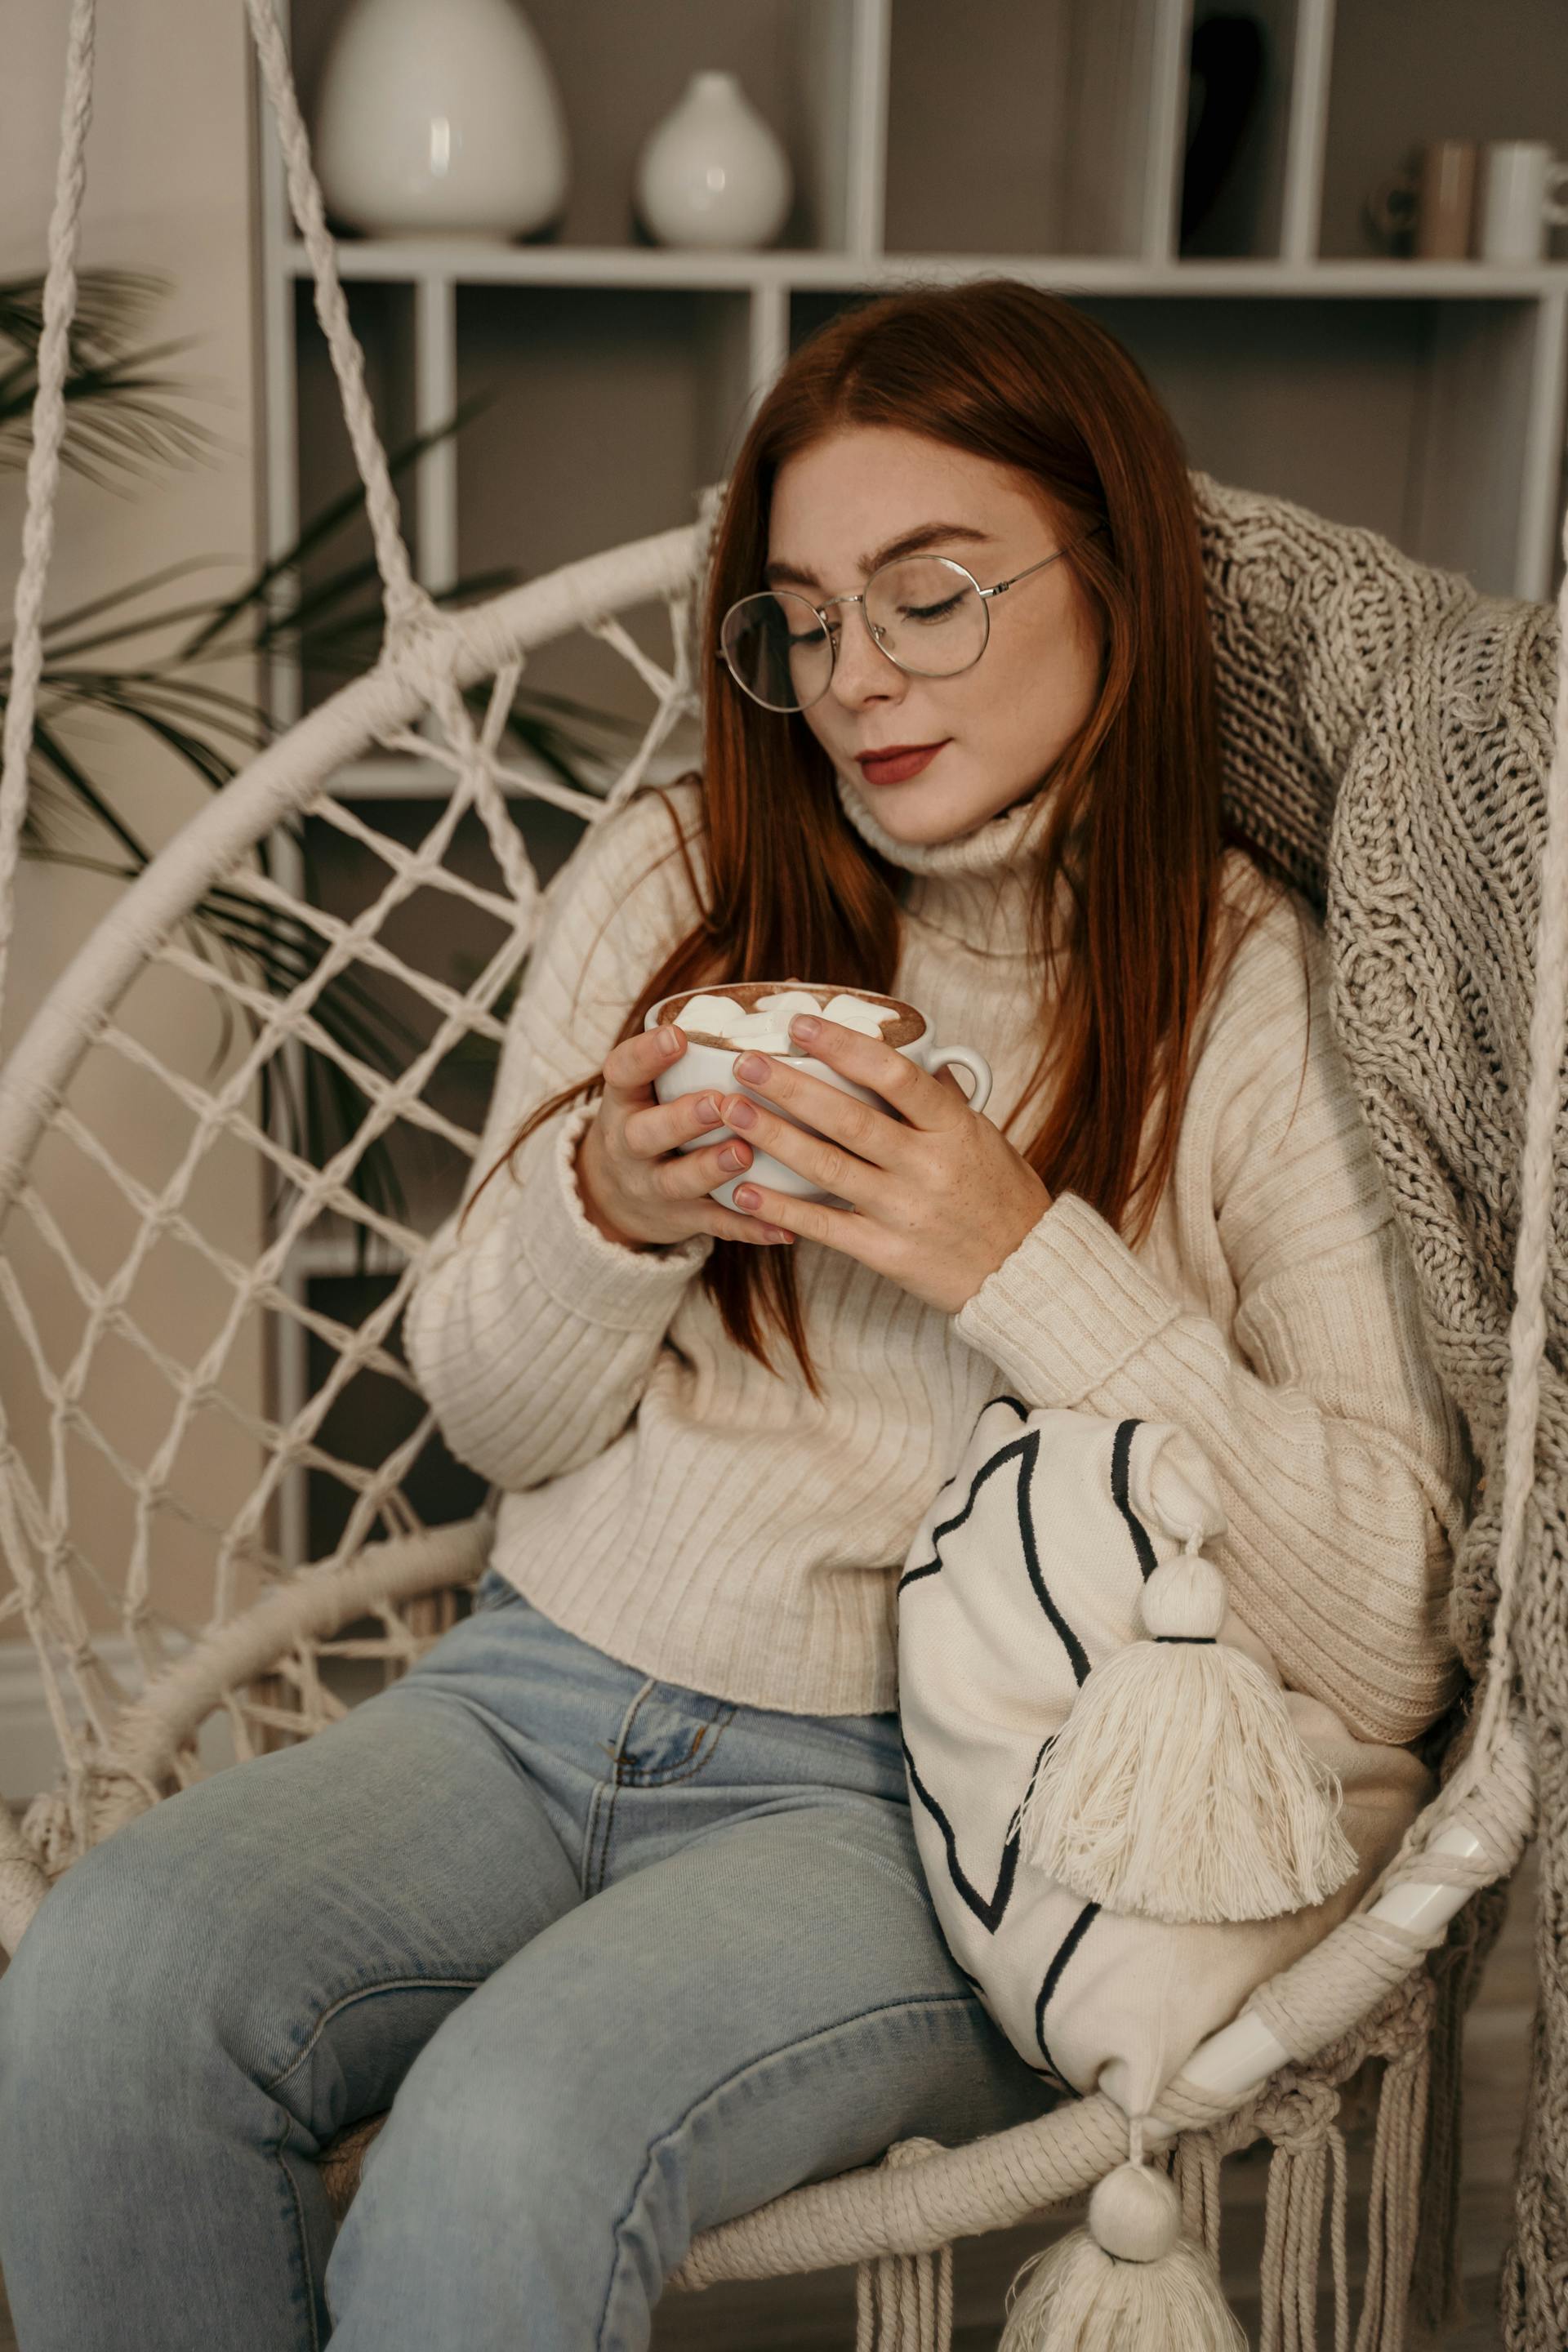 Woman drinking hot chocolate | Source: Pexels